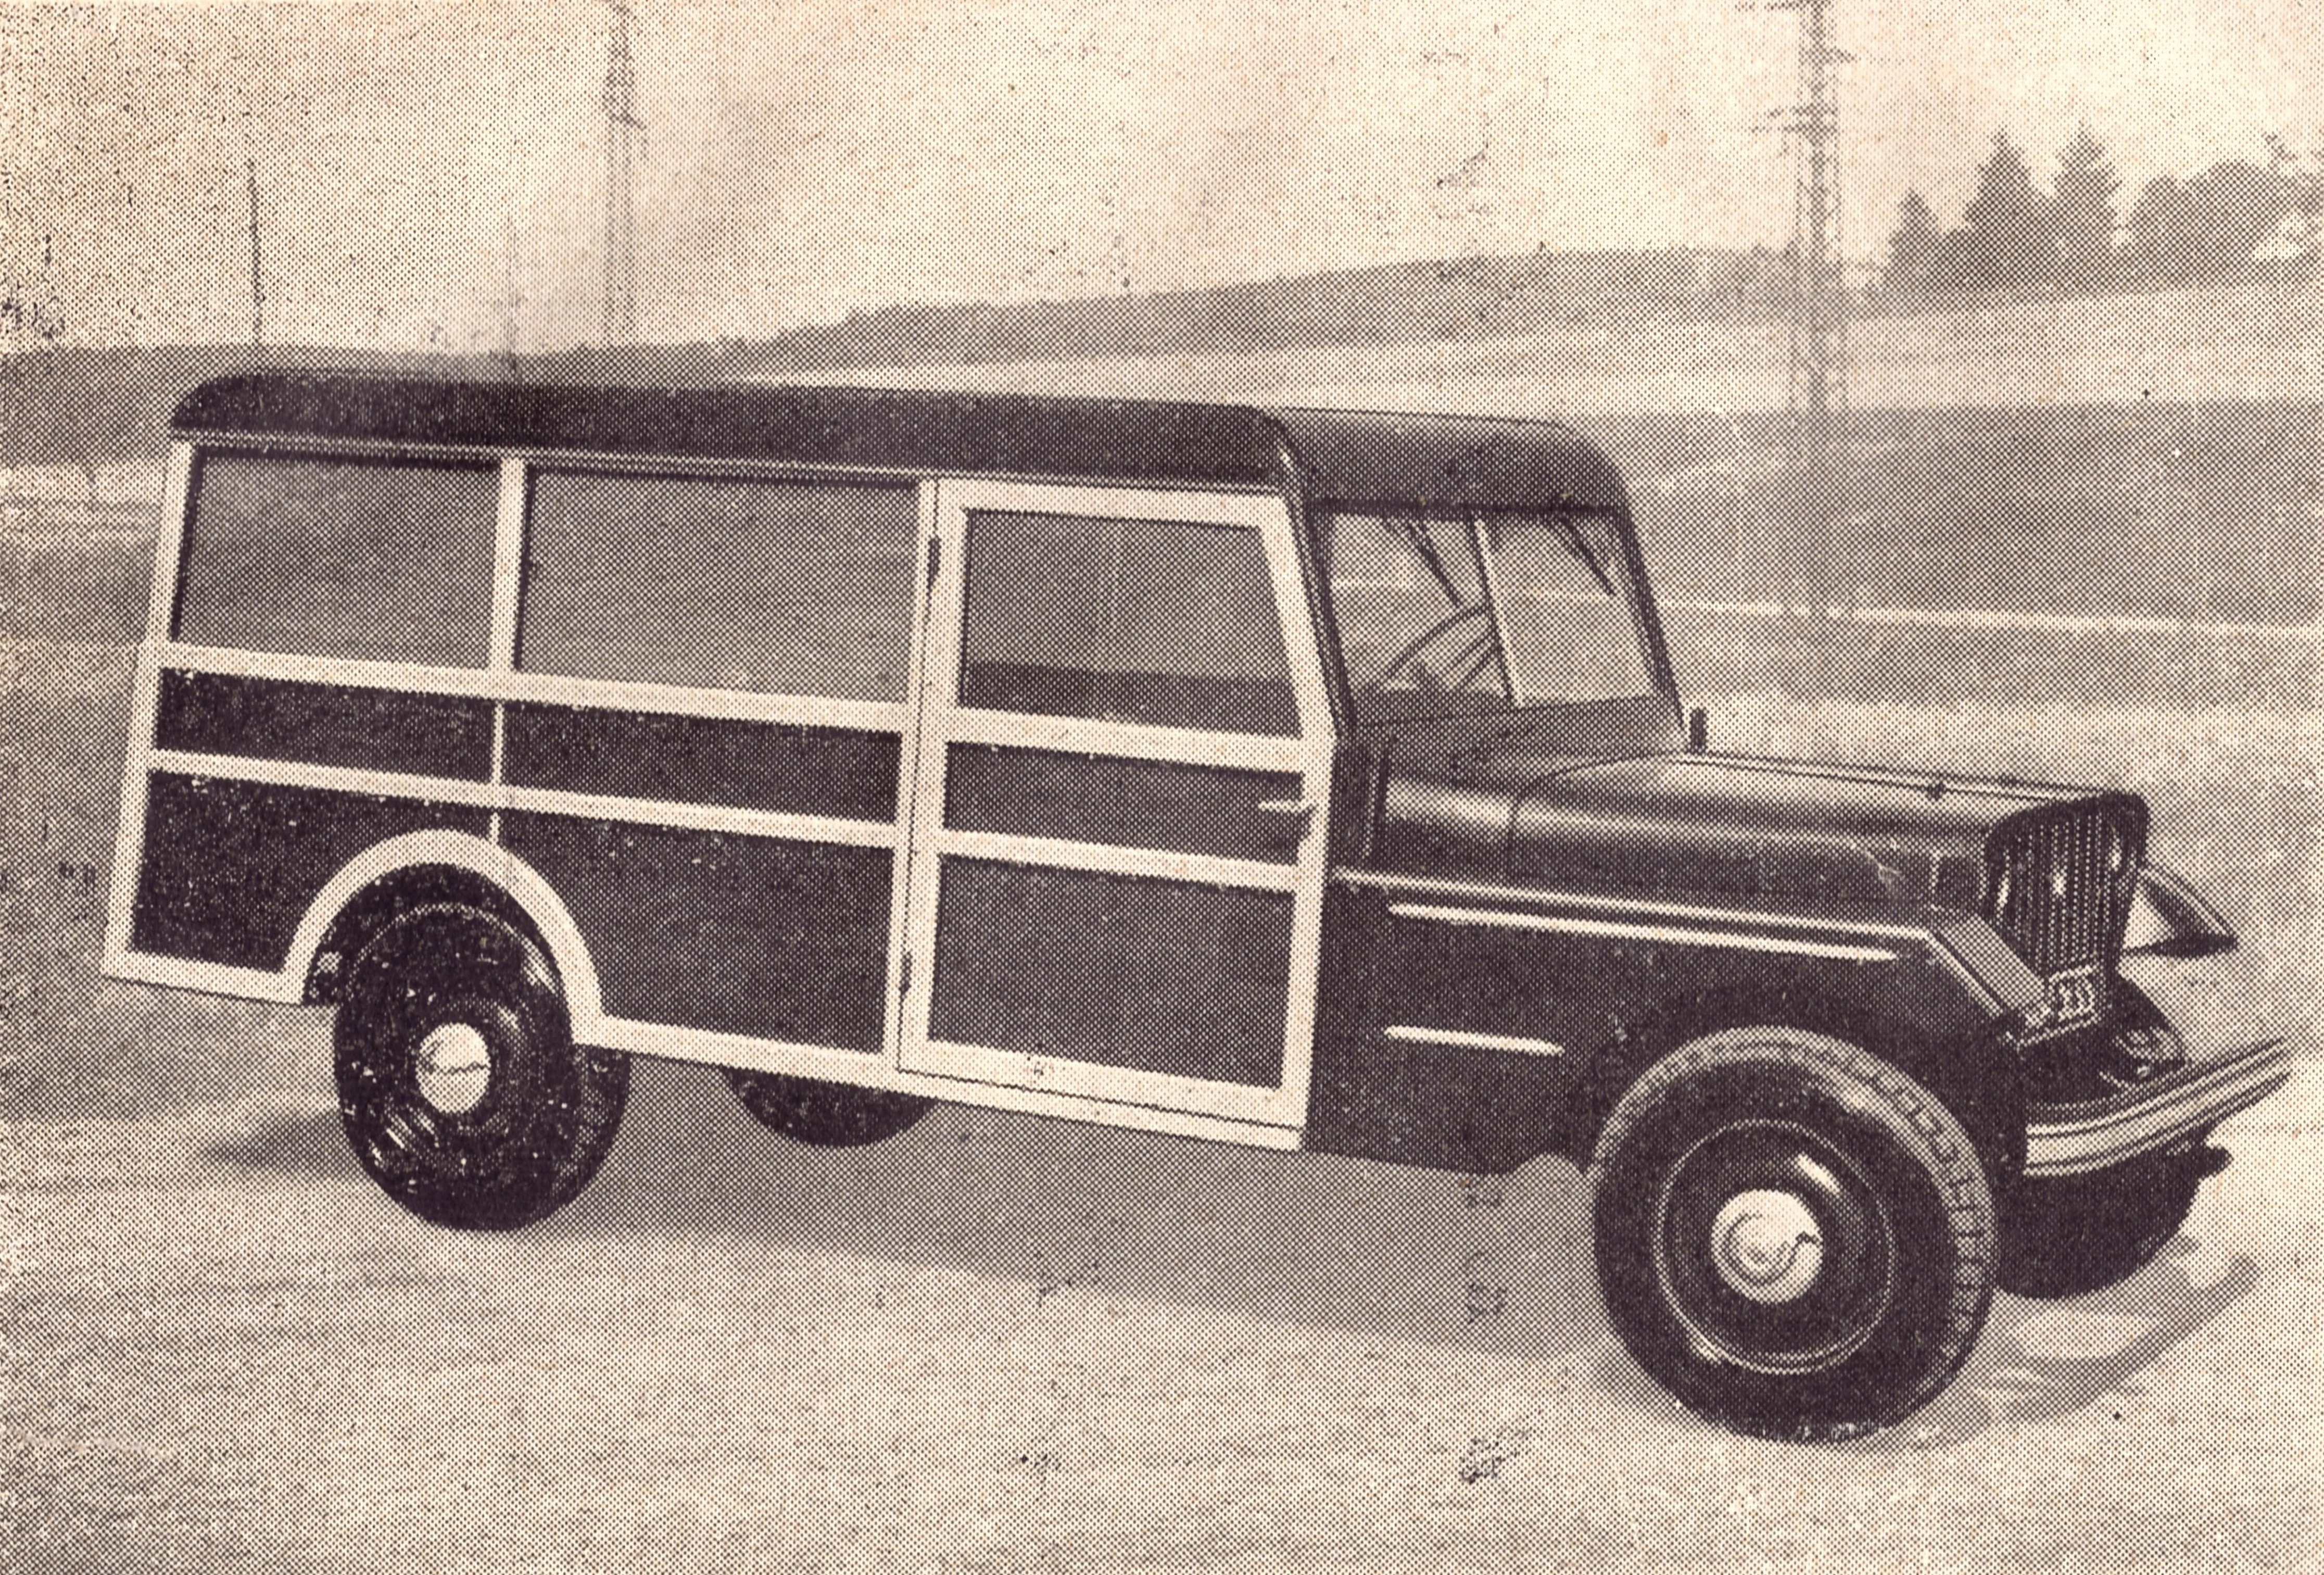 One of Postwar Germany's Largest Carmakers Was Briefly.... Jeep?